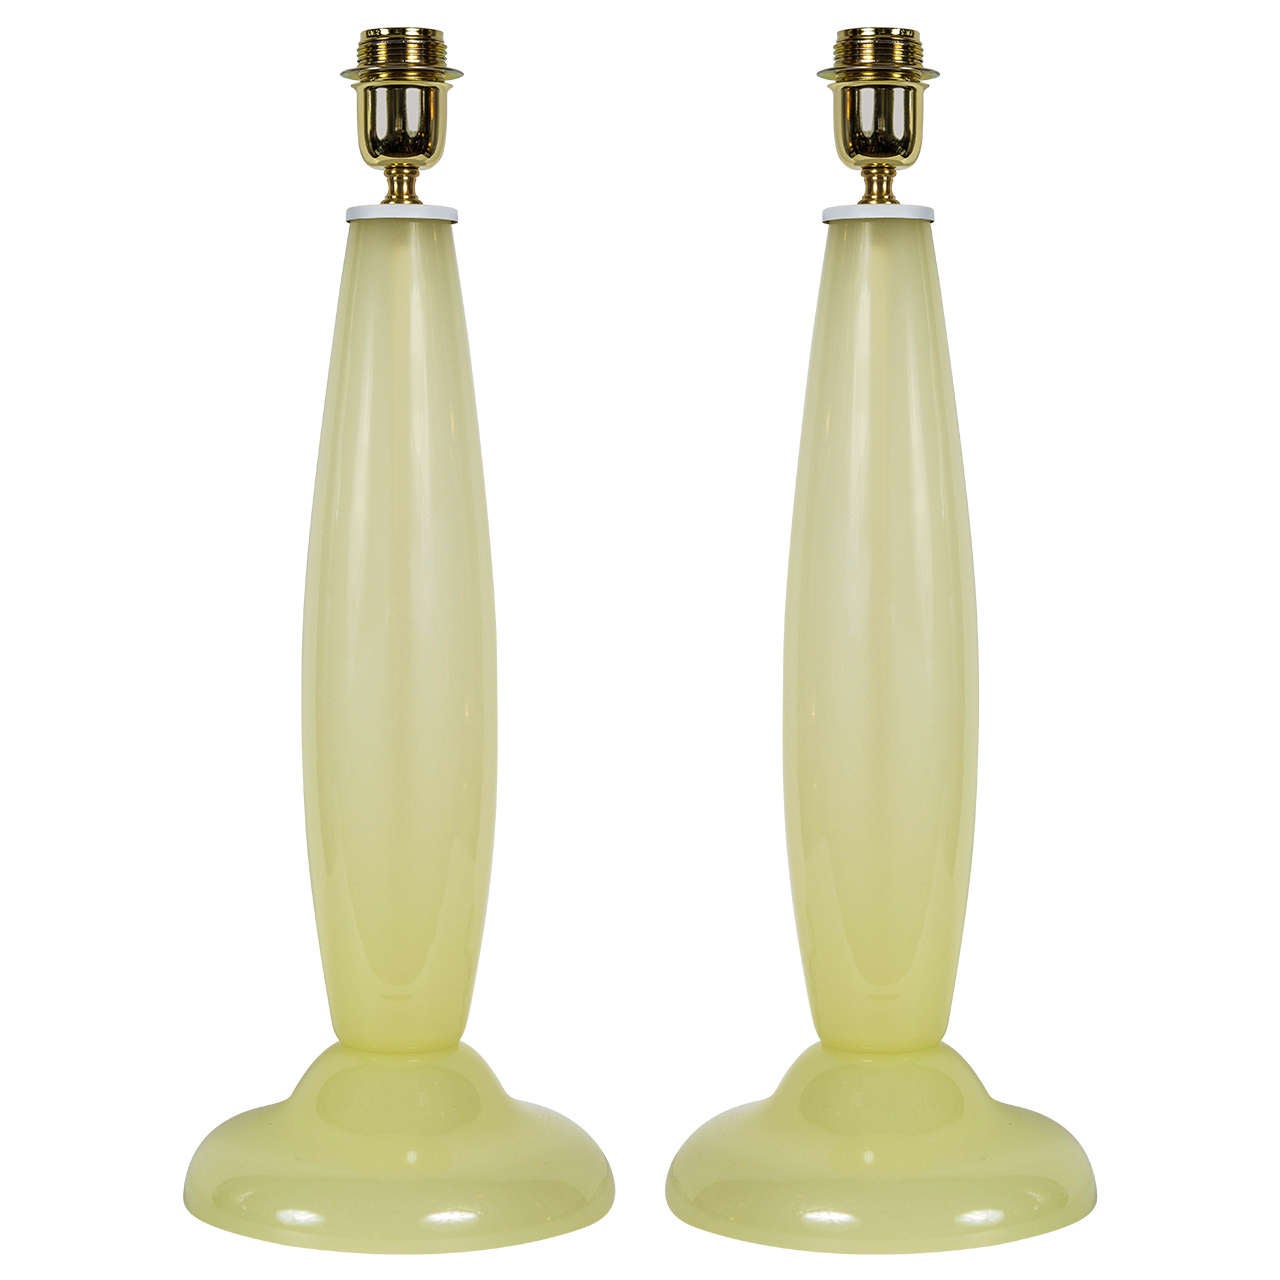 Pair of Table Lamps in Murano Glass by Cenedese